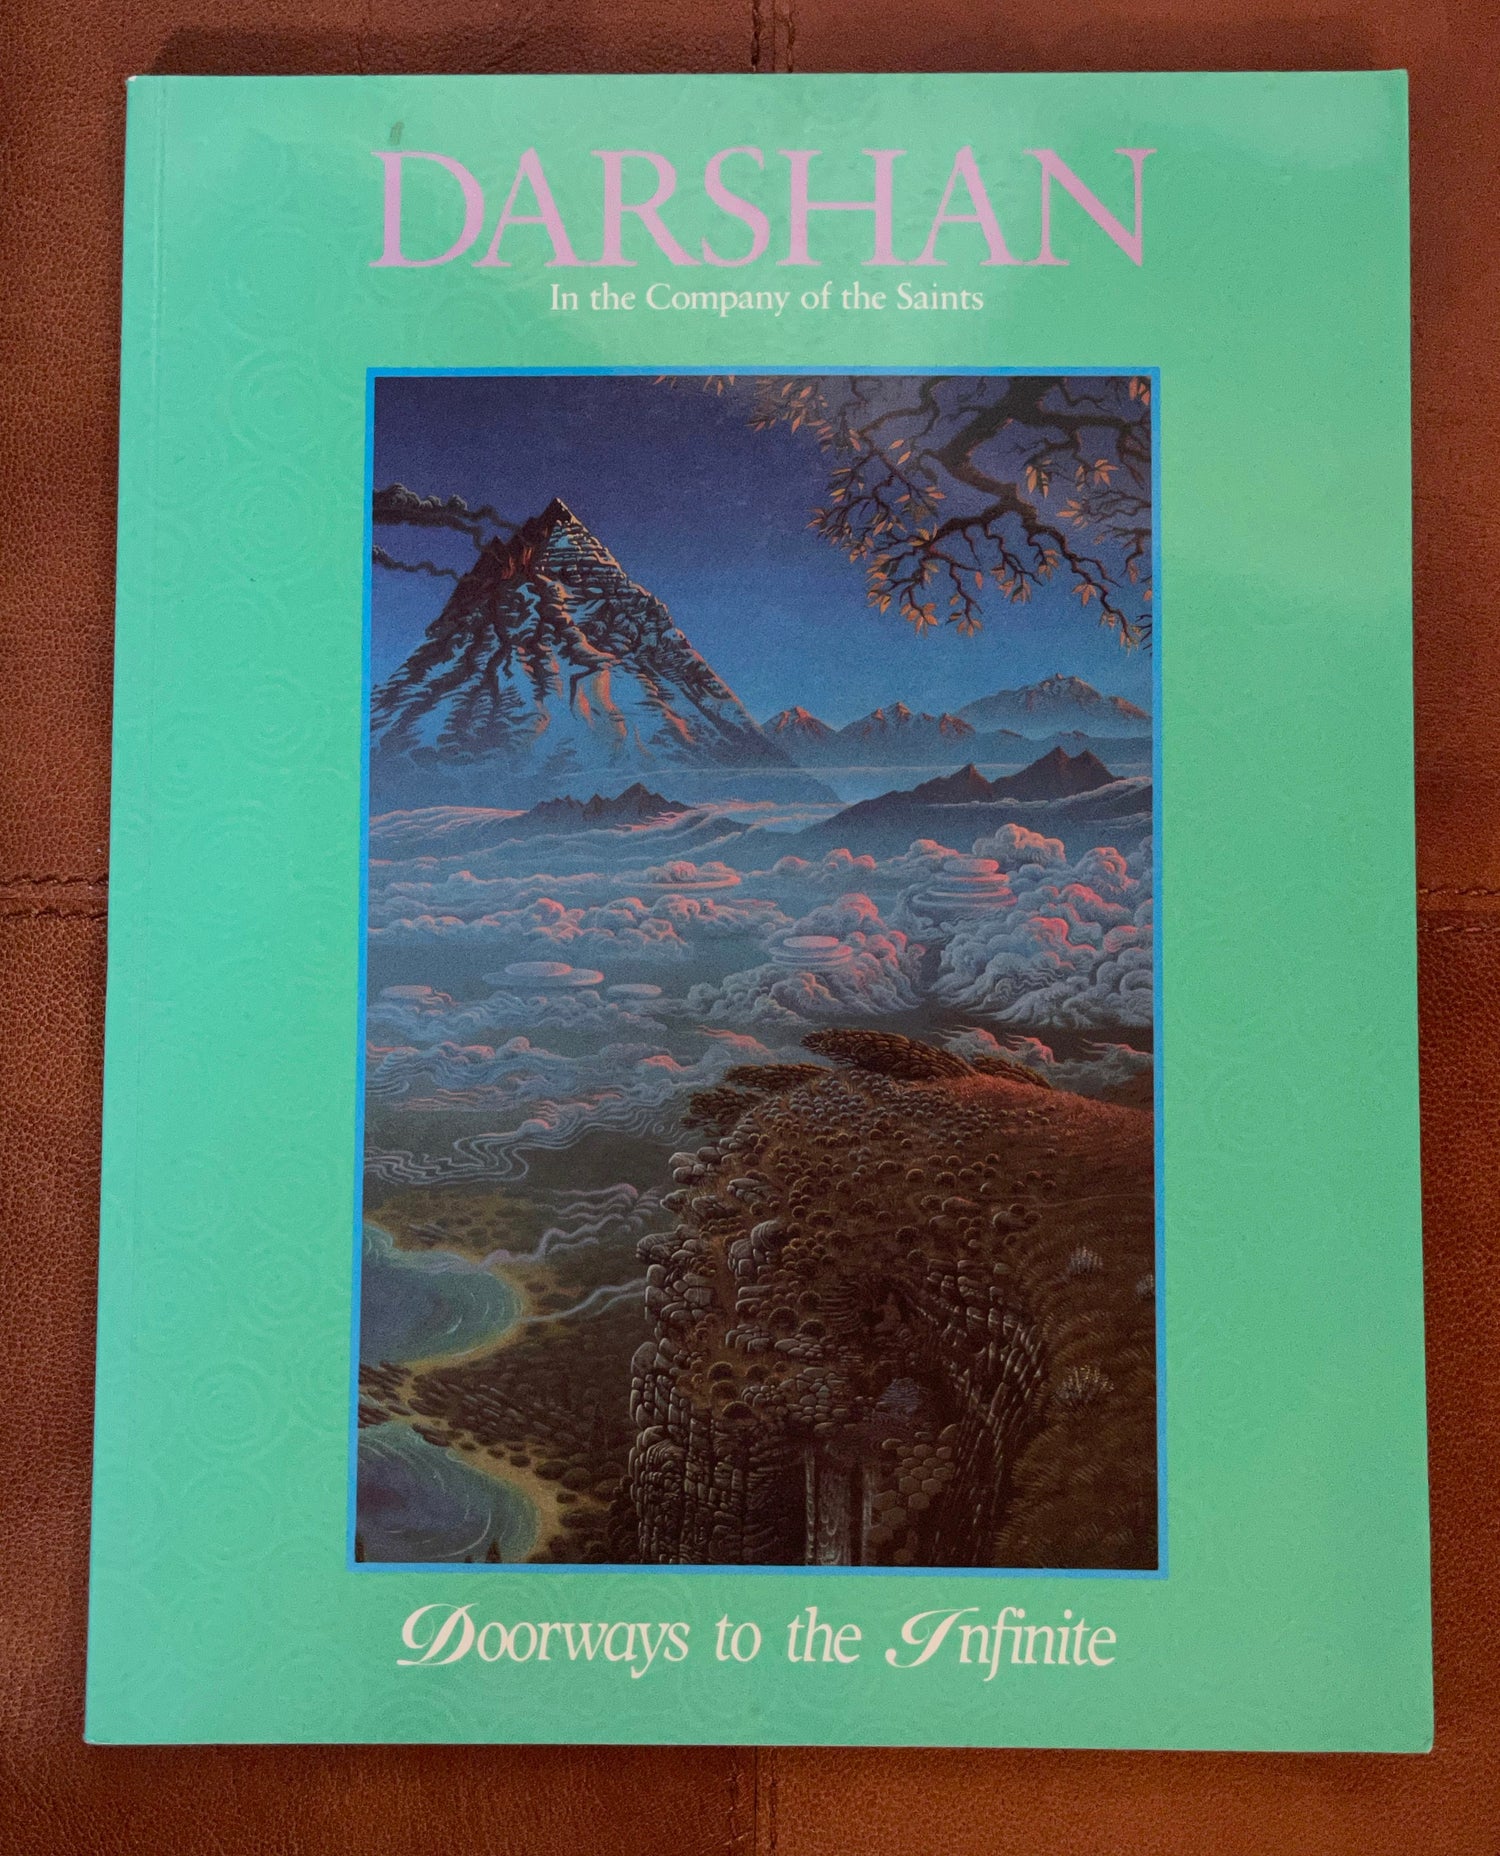 Darshan Magazine, In The Company of The Saints, Doorways to the Infinite